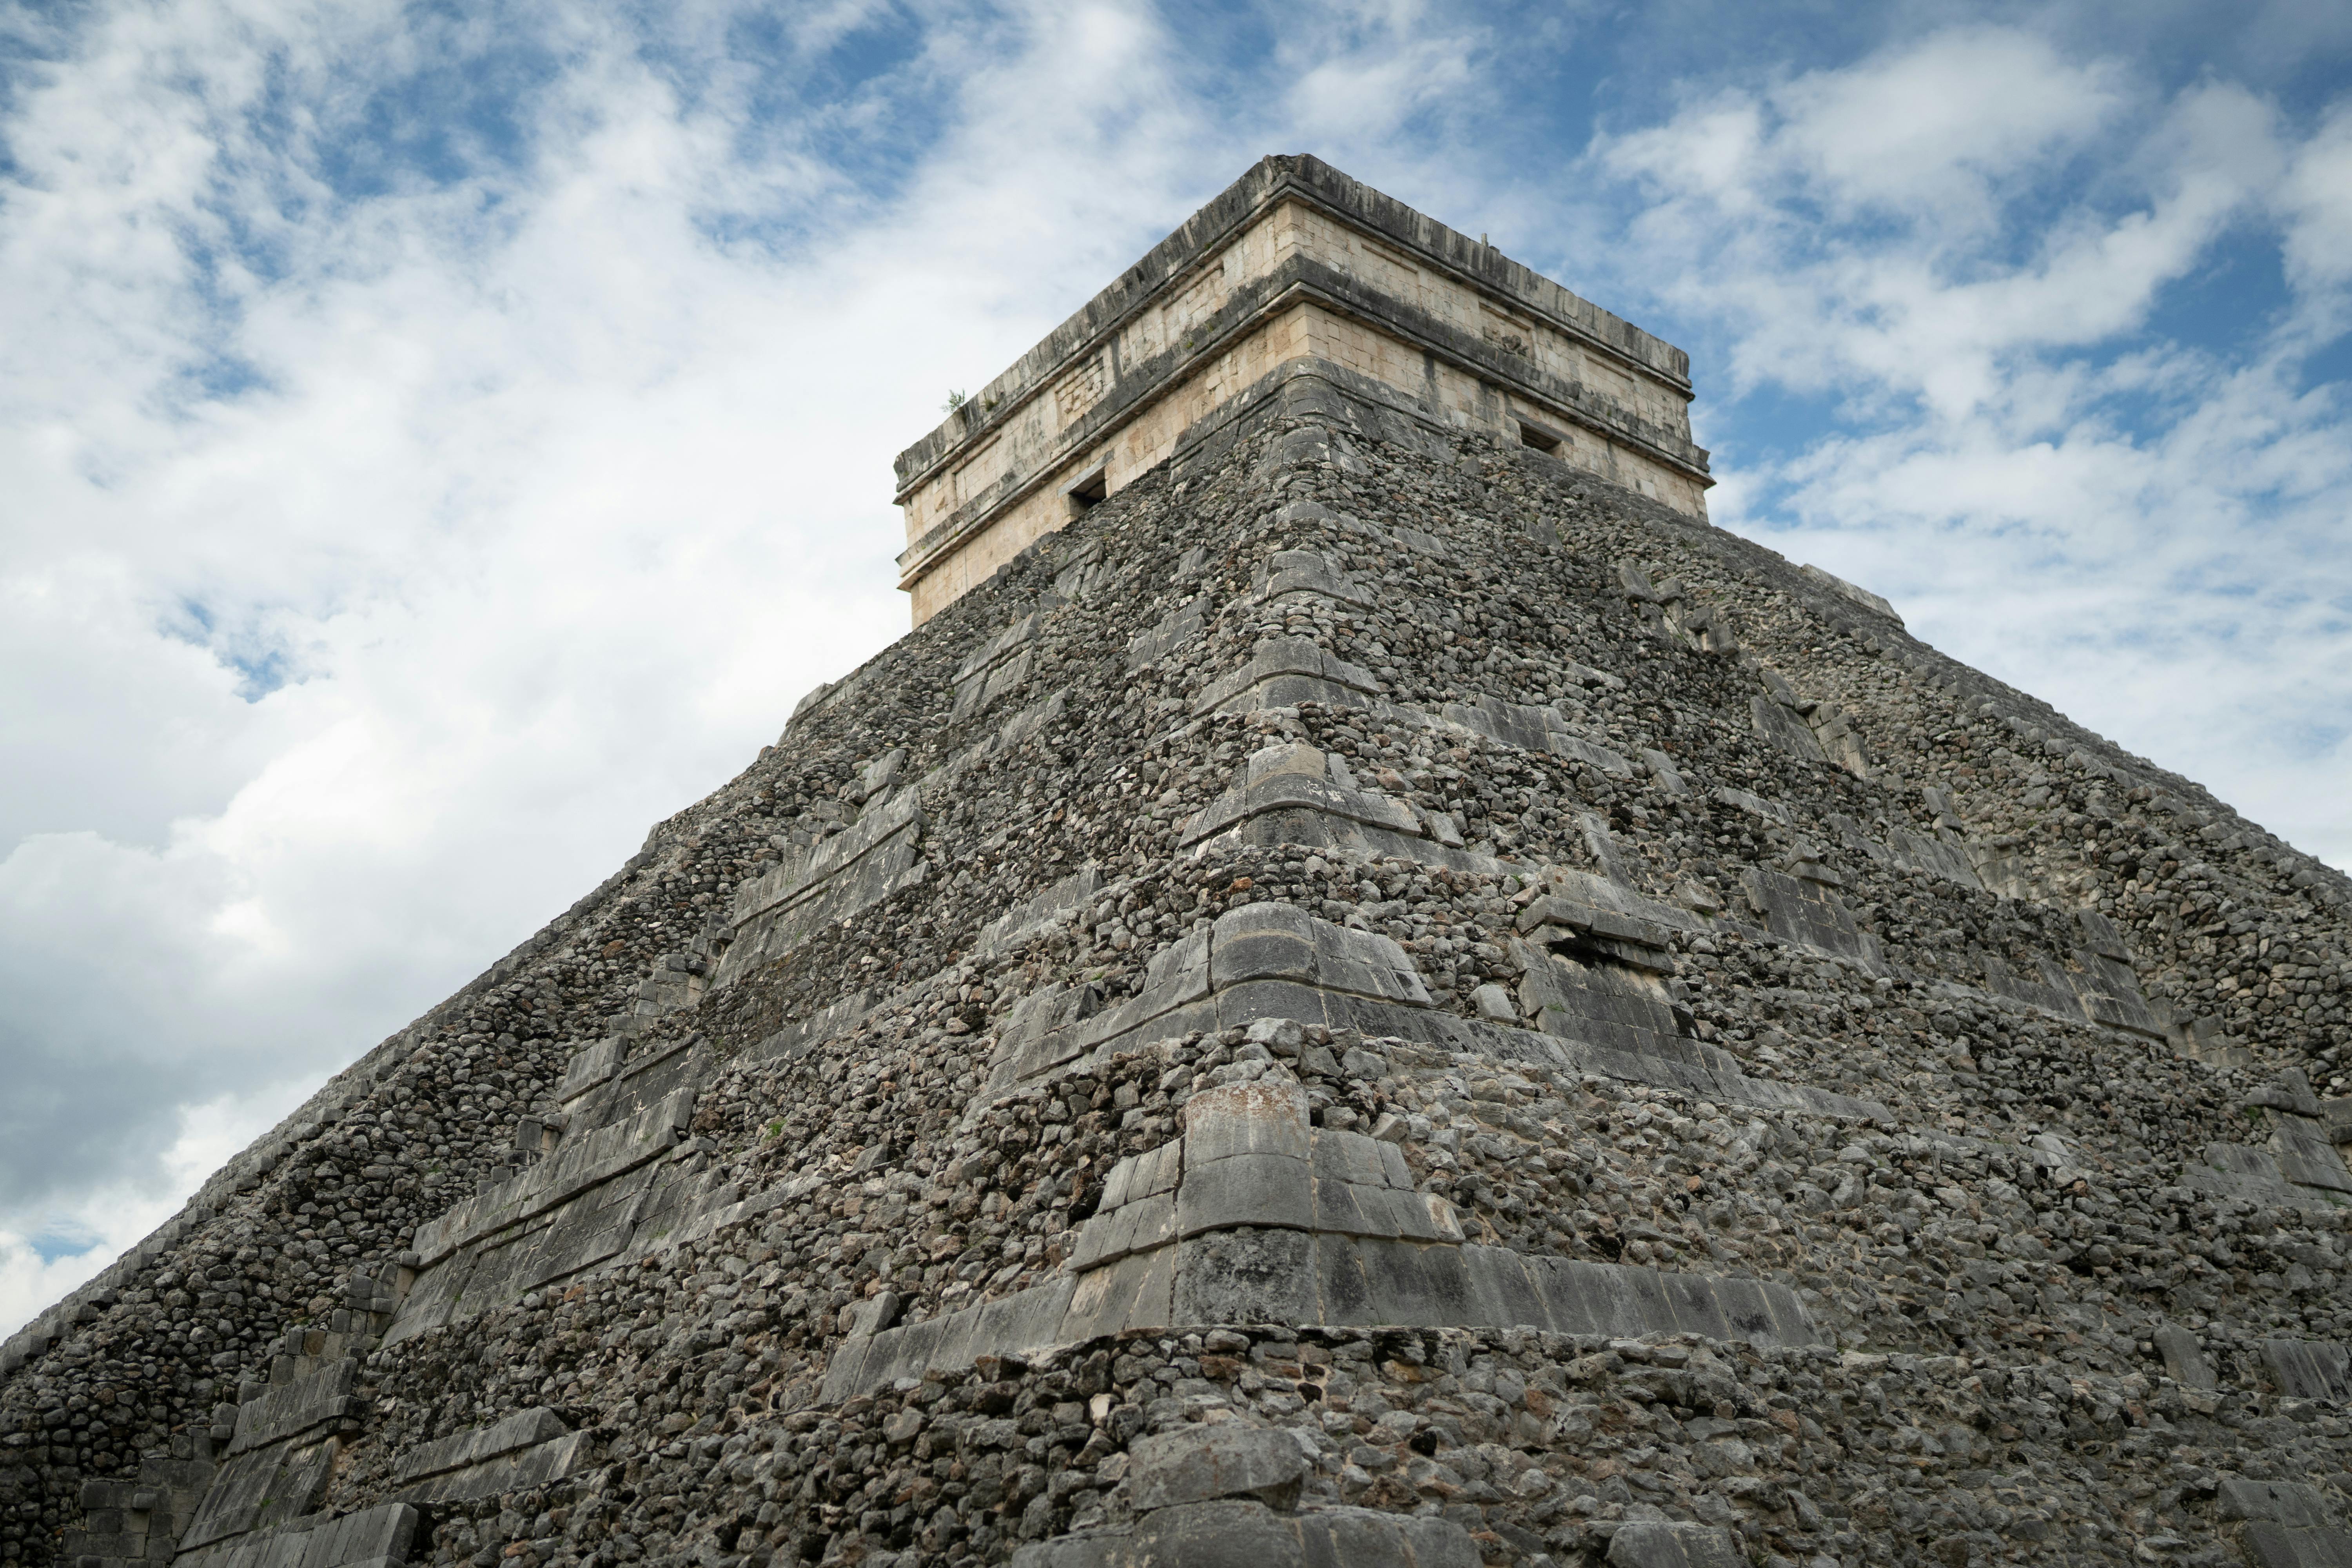 The Enchanting Architecture of Chichen Itza: Exploring the Mysteries of an Ancient Mayan City